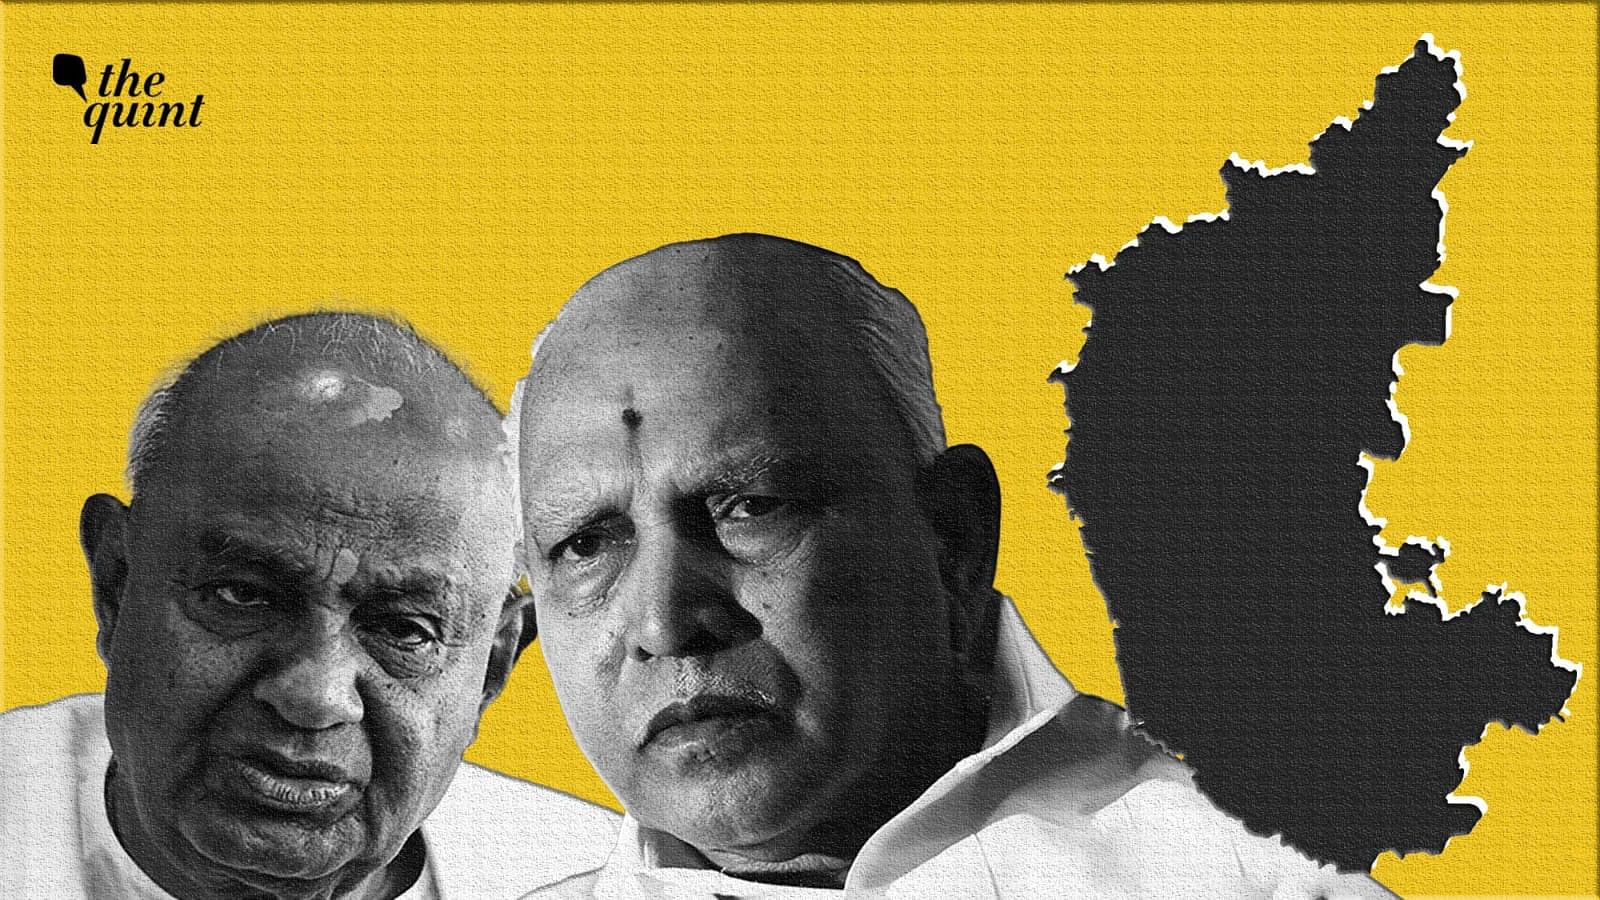 <div class="paragraphs"><p>The Karnataka BJP leaders, who were earlier confident of repeating the 2019 Lok Sabha performance of winning 25 of the total 28 Parliamentary seats, seemed to have realised that this feat cannot be achieved independently in the present political circumstances.</p></div>